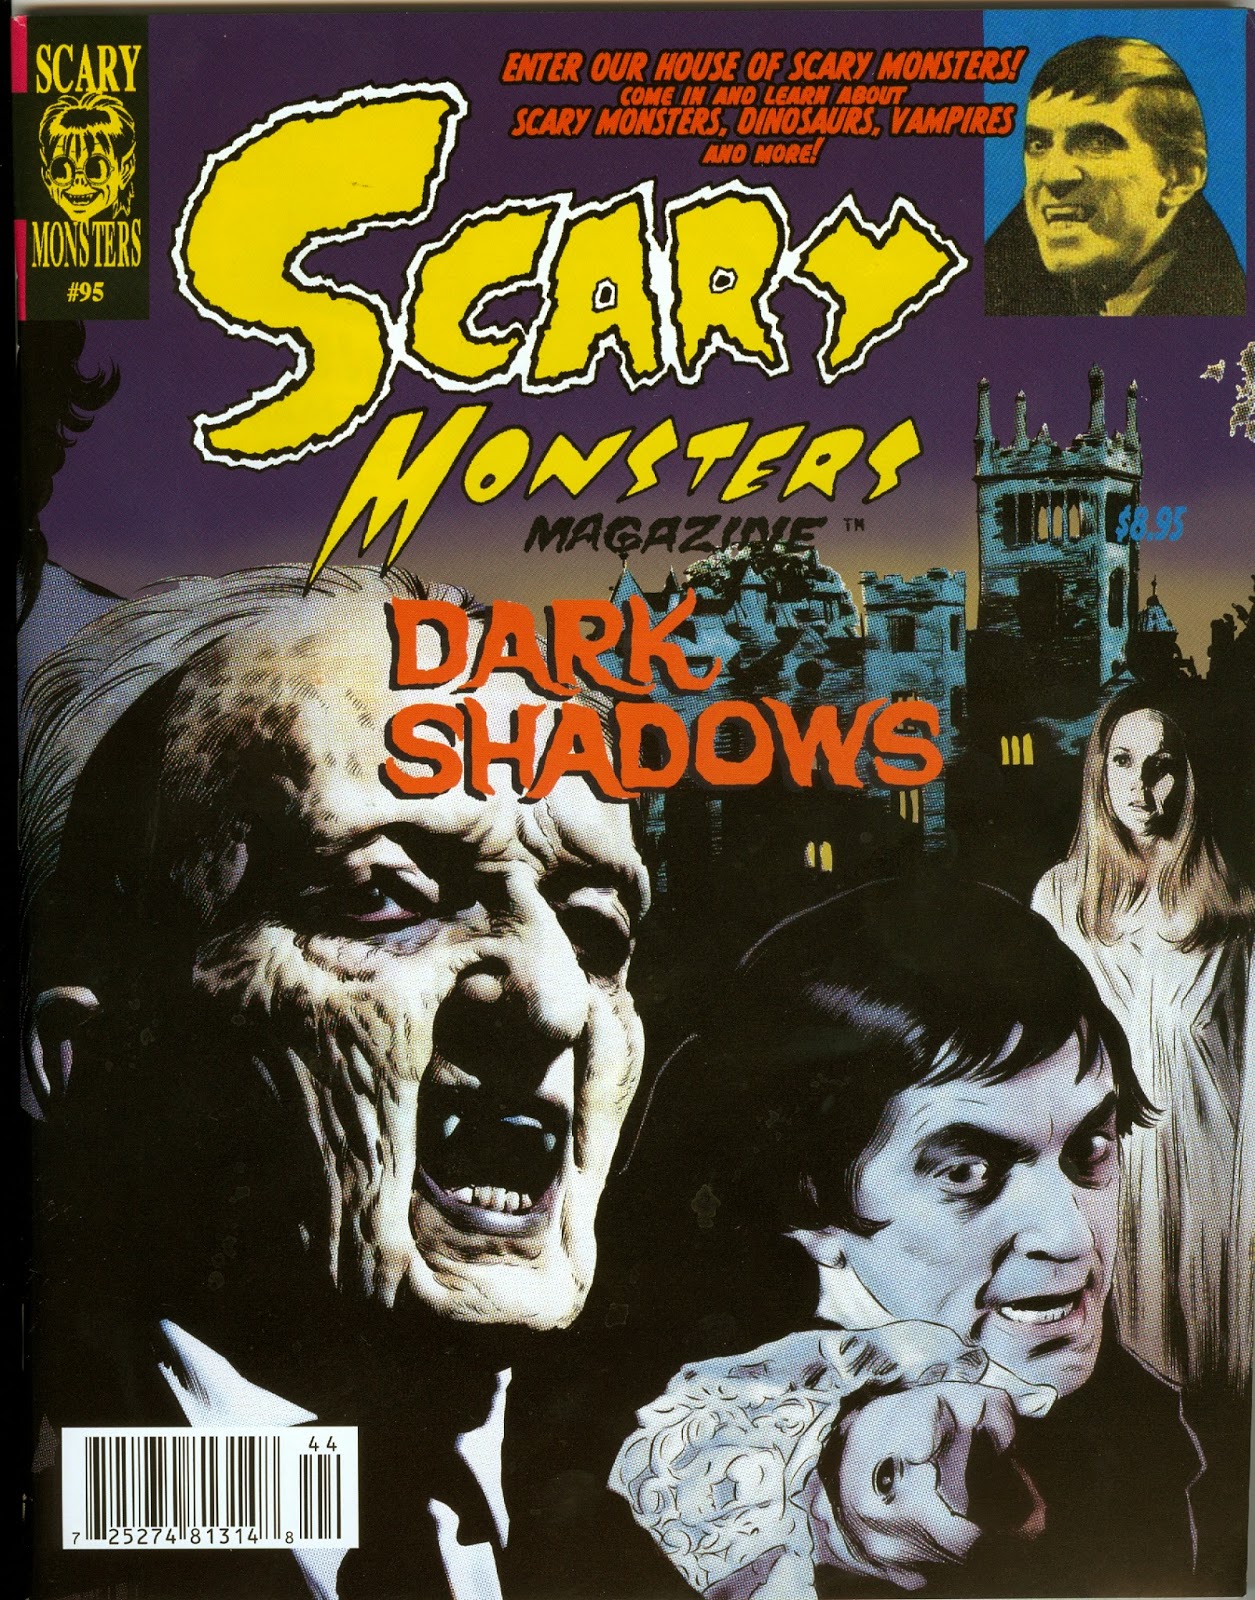 http://drgangrene.blogspot.com/2015/05/scary-monsters-95-interview-with-mark.html